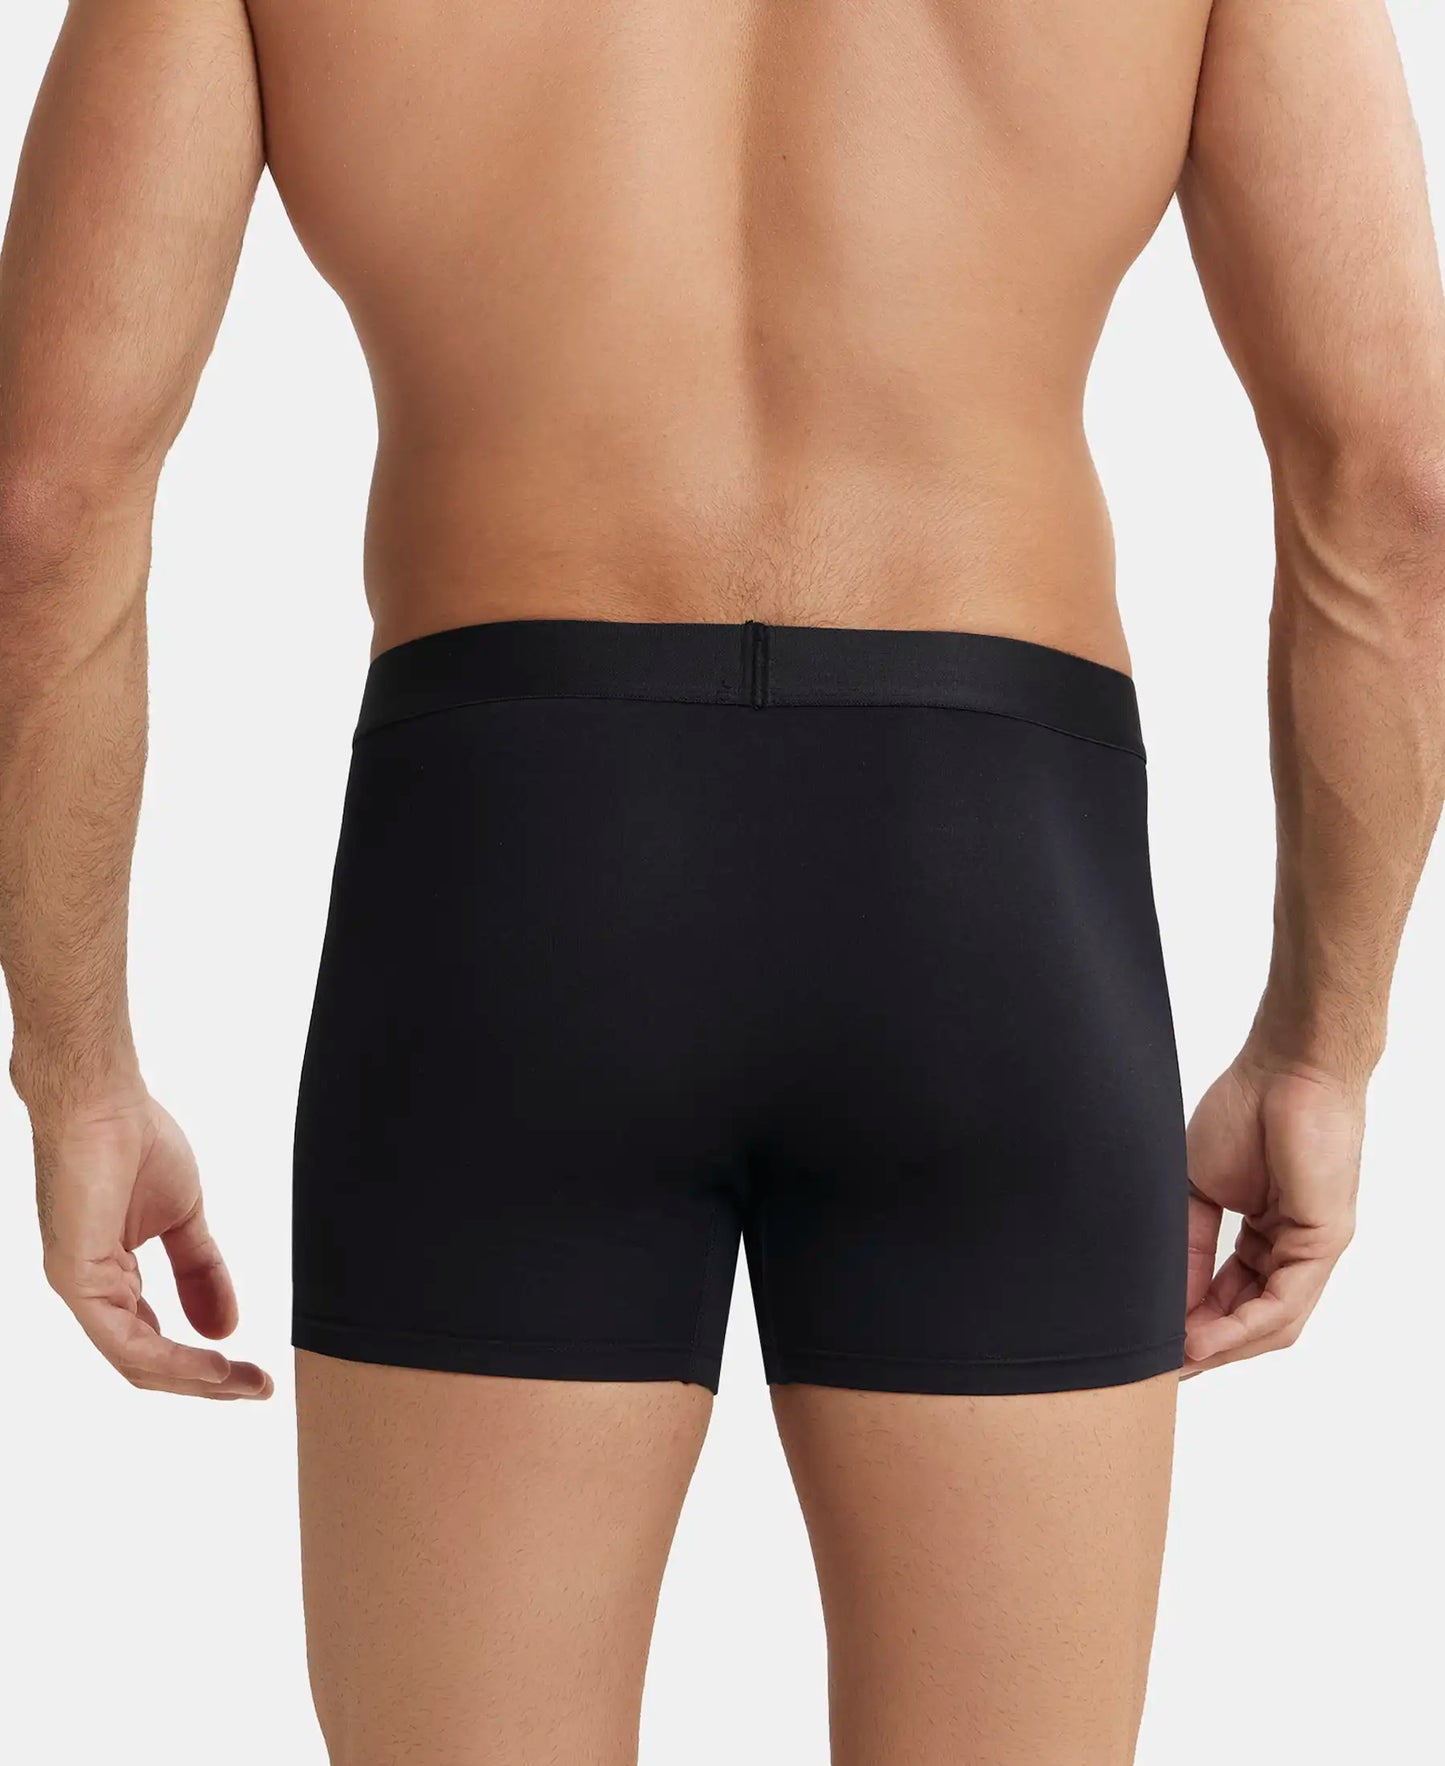 Tencel Micro Modal Cotton Elastane Stretch Solid Boxer Brief with Internal Breathable Mesh - Black-3